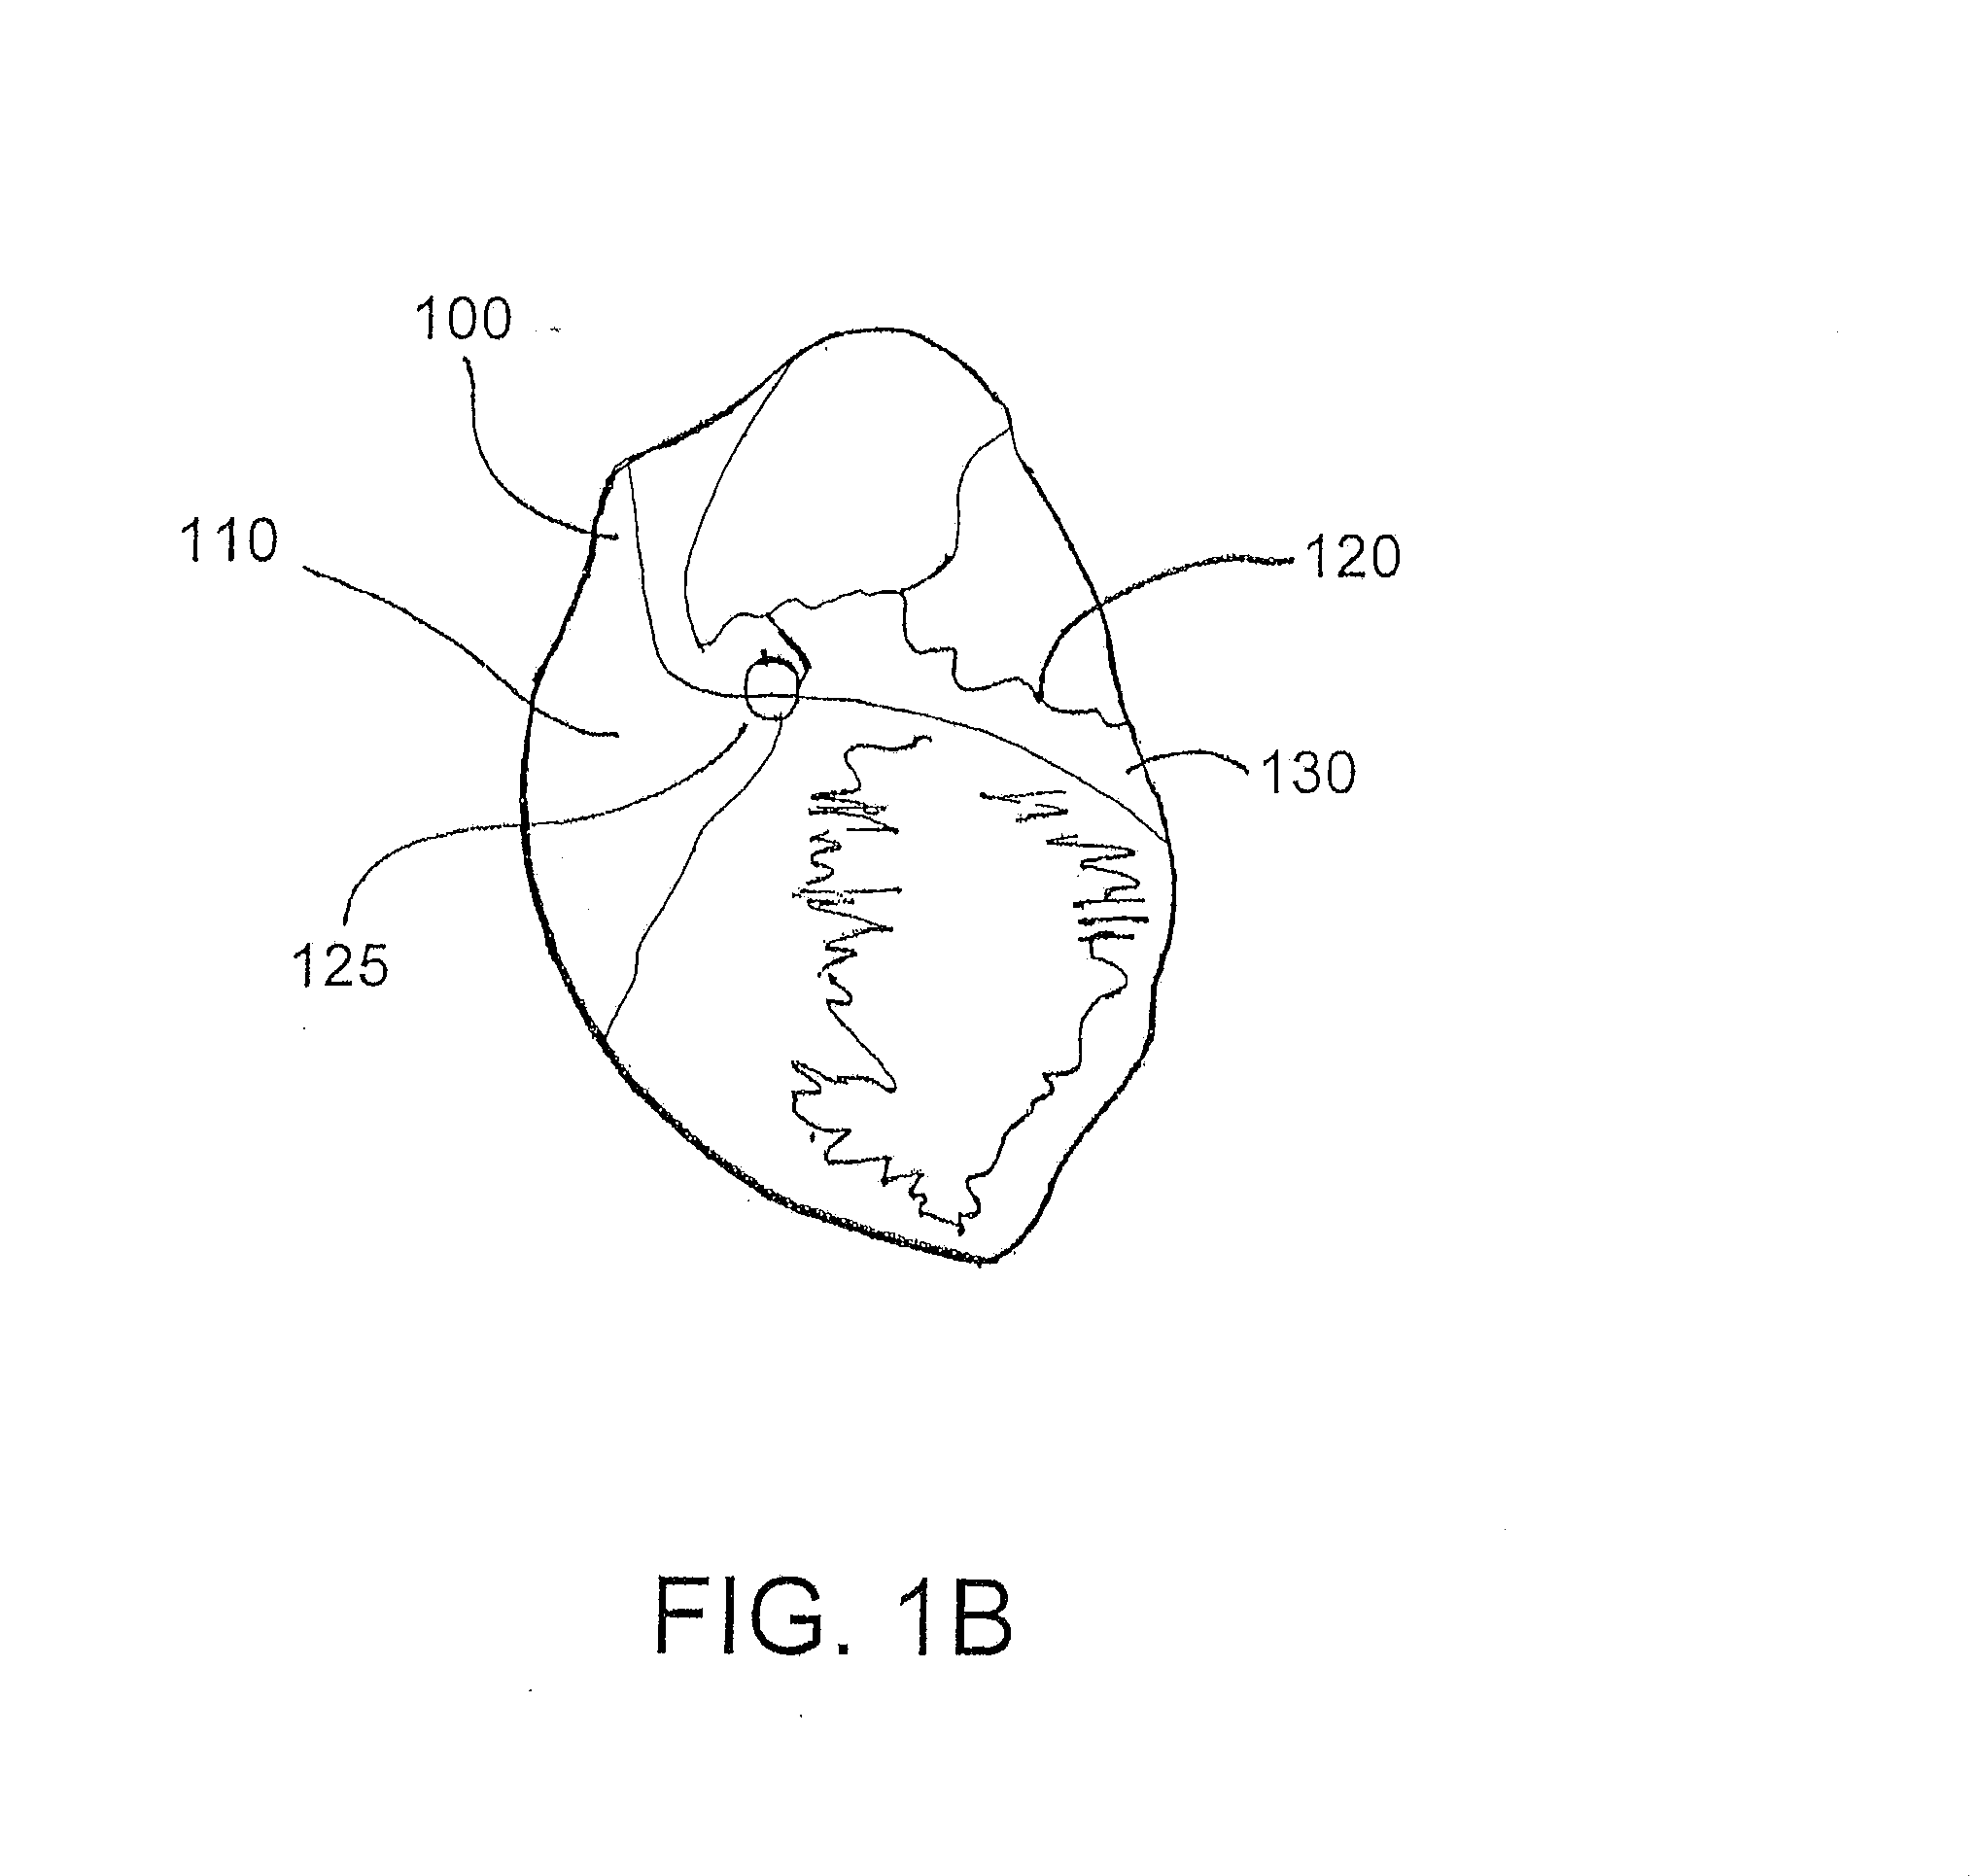 Systems and methods for localization of a puncture site relative to a mammalian tissue of interest